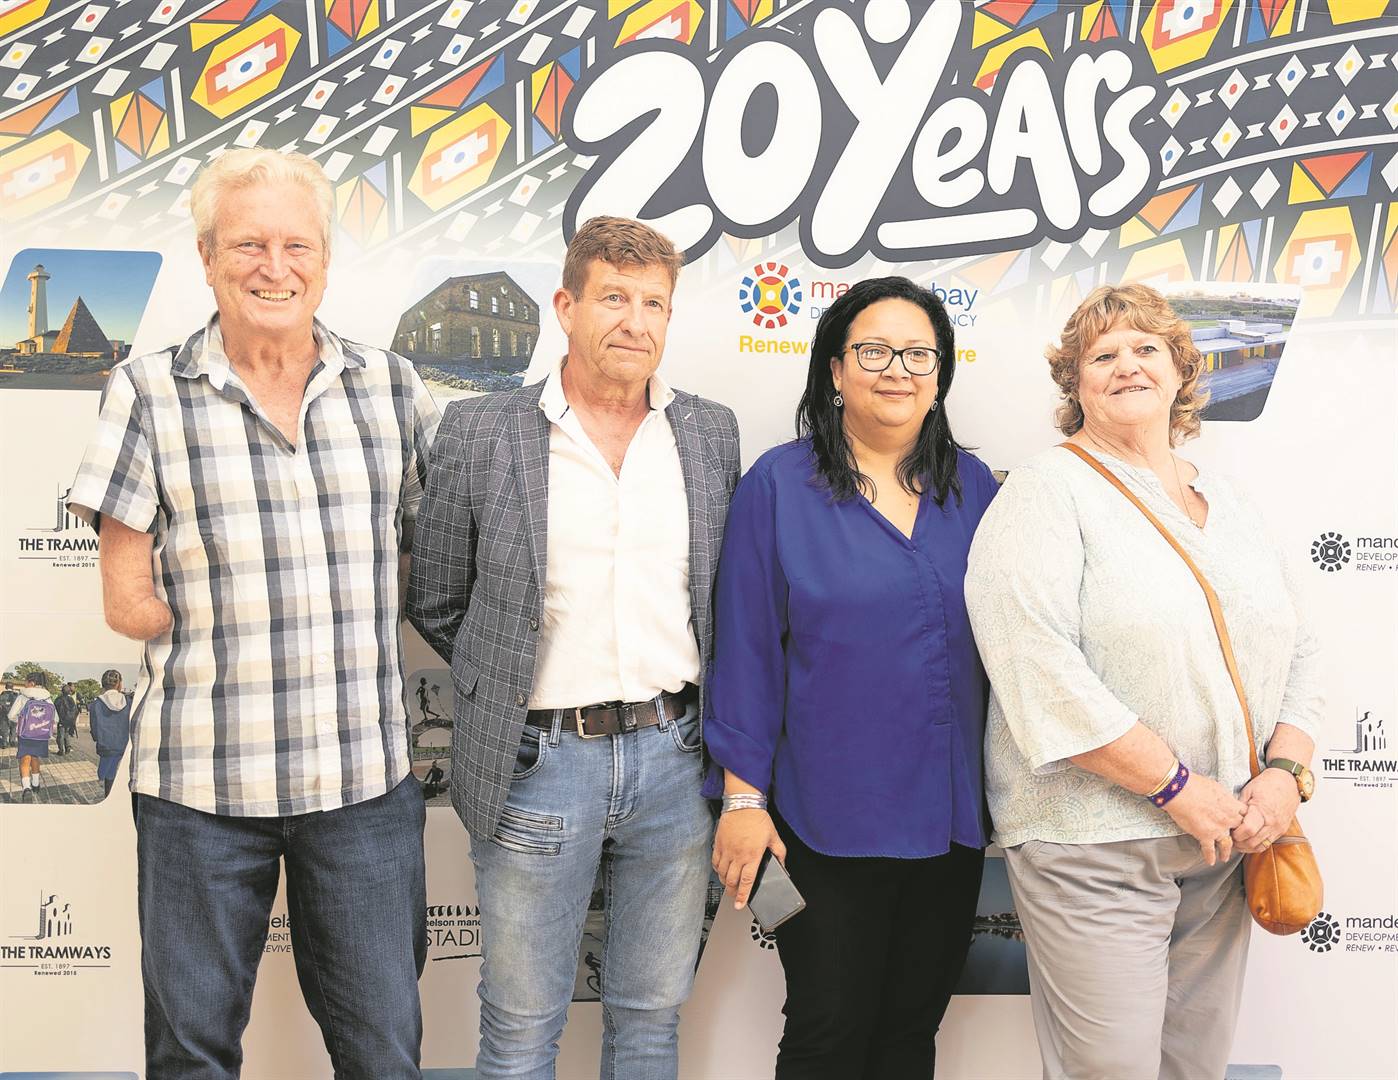 Partners in the Heritage and Tourism Indaba to be held on October 25, from left, Discover Mandela Bay project manager Shaun van Eck, Historical Society of PE chair Graham Taylor, MBDA operations executive Debbie Hendricks, and Mandela Bay Heritage Trust chair Lyn Haller.                                                     